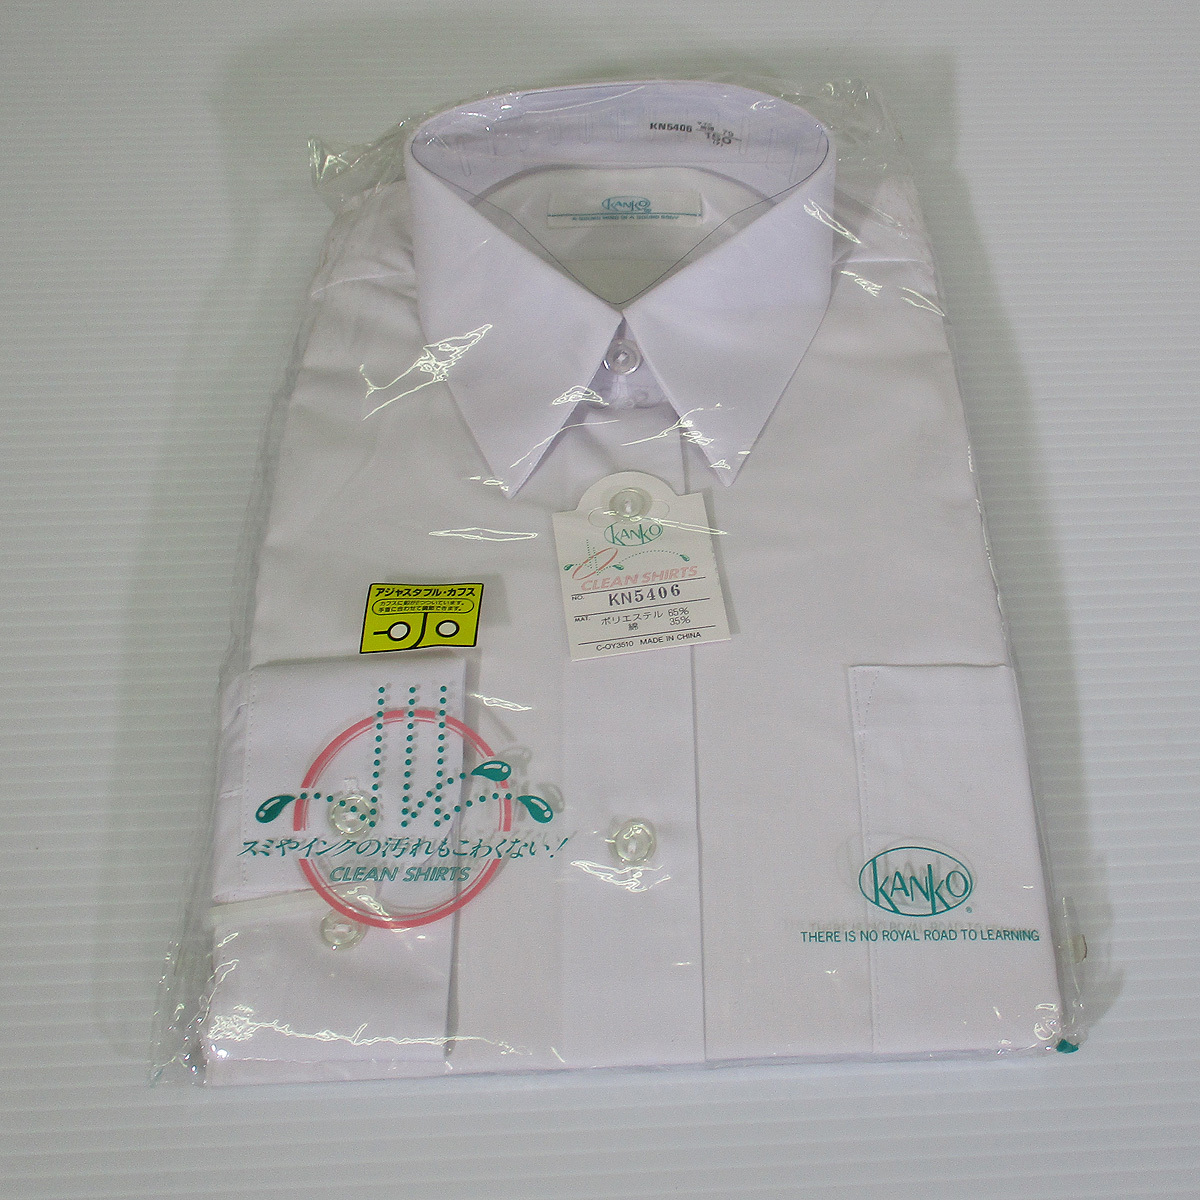 [ clothing shop stock goods can ko- school shirt long sleeve 3 sheets together ] unopened 150 woman shirt Kanko schole adjustable cuffs #0446-003